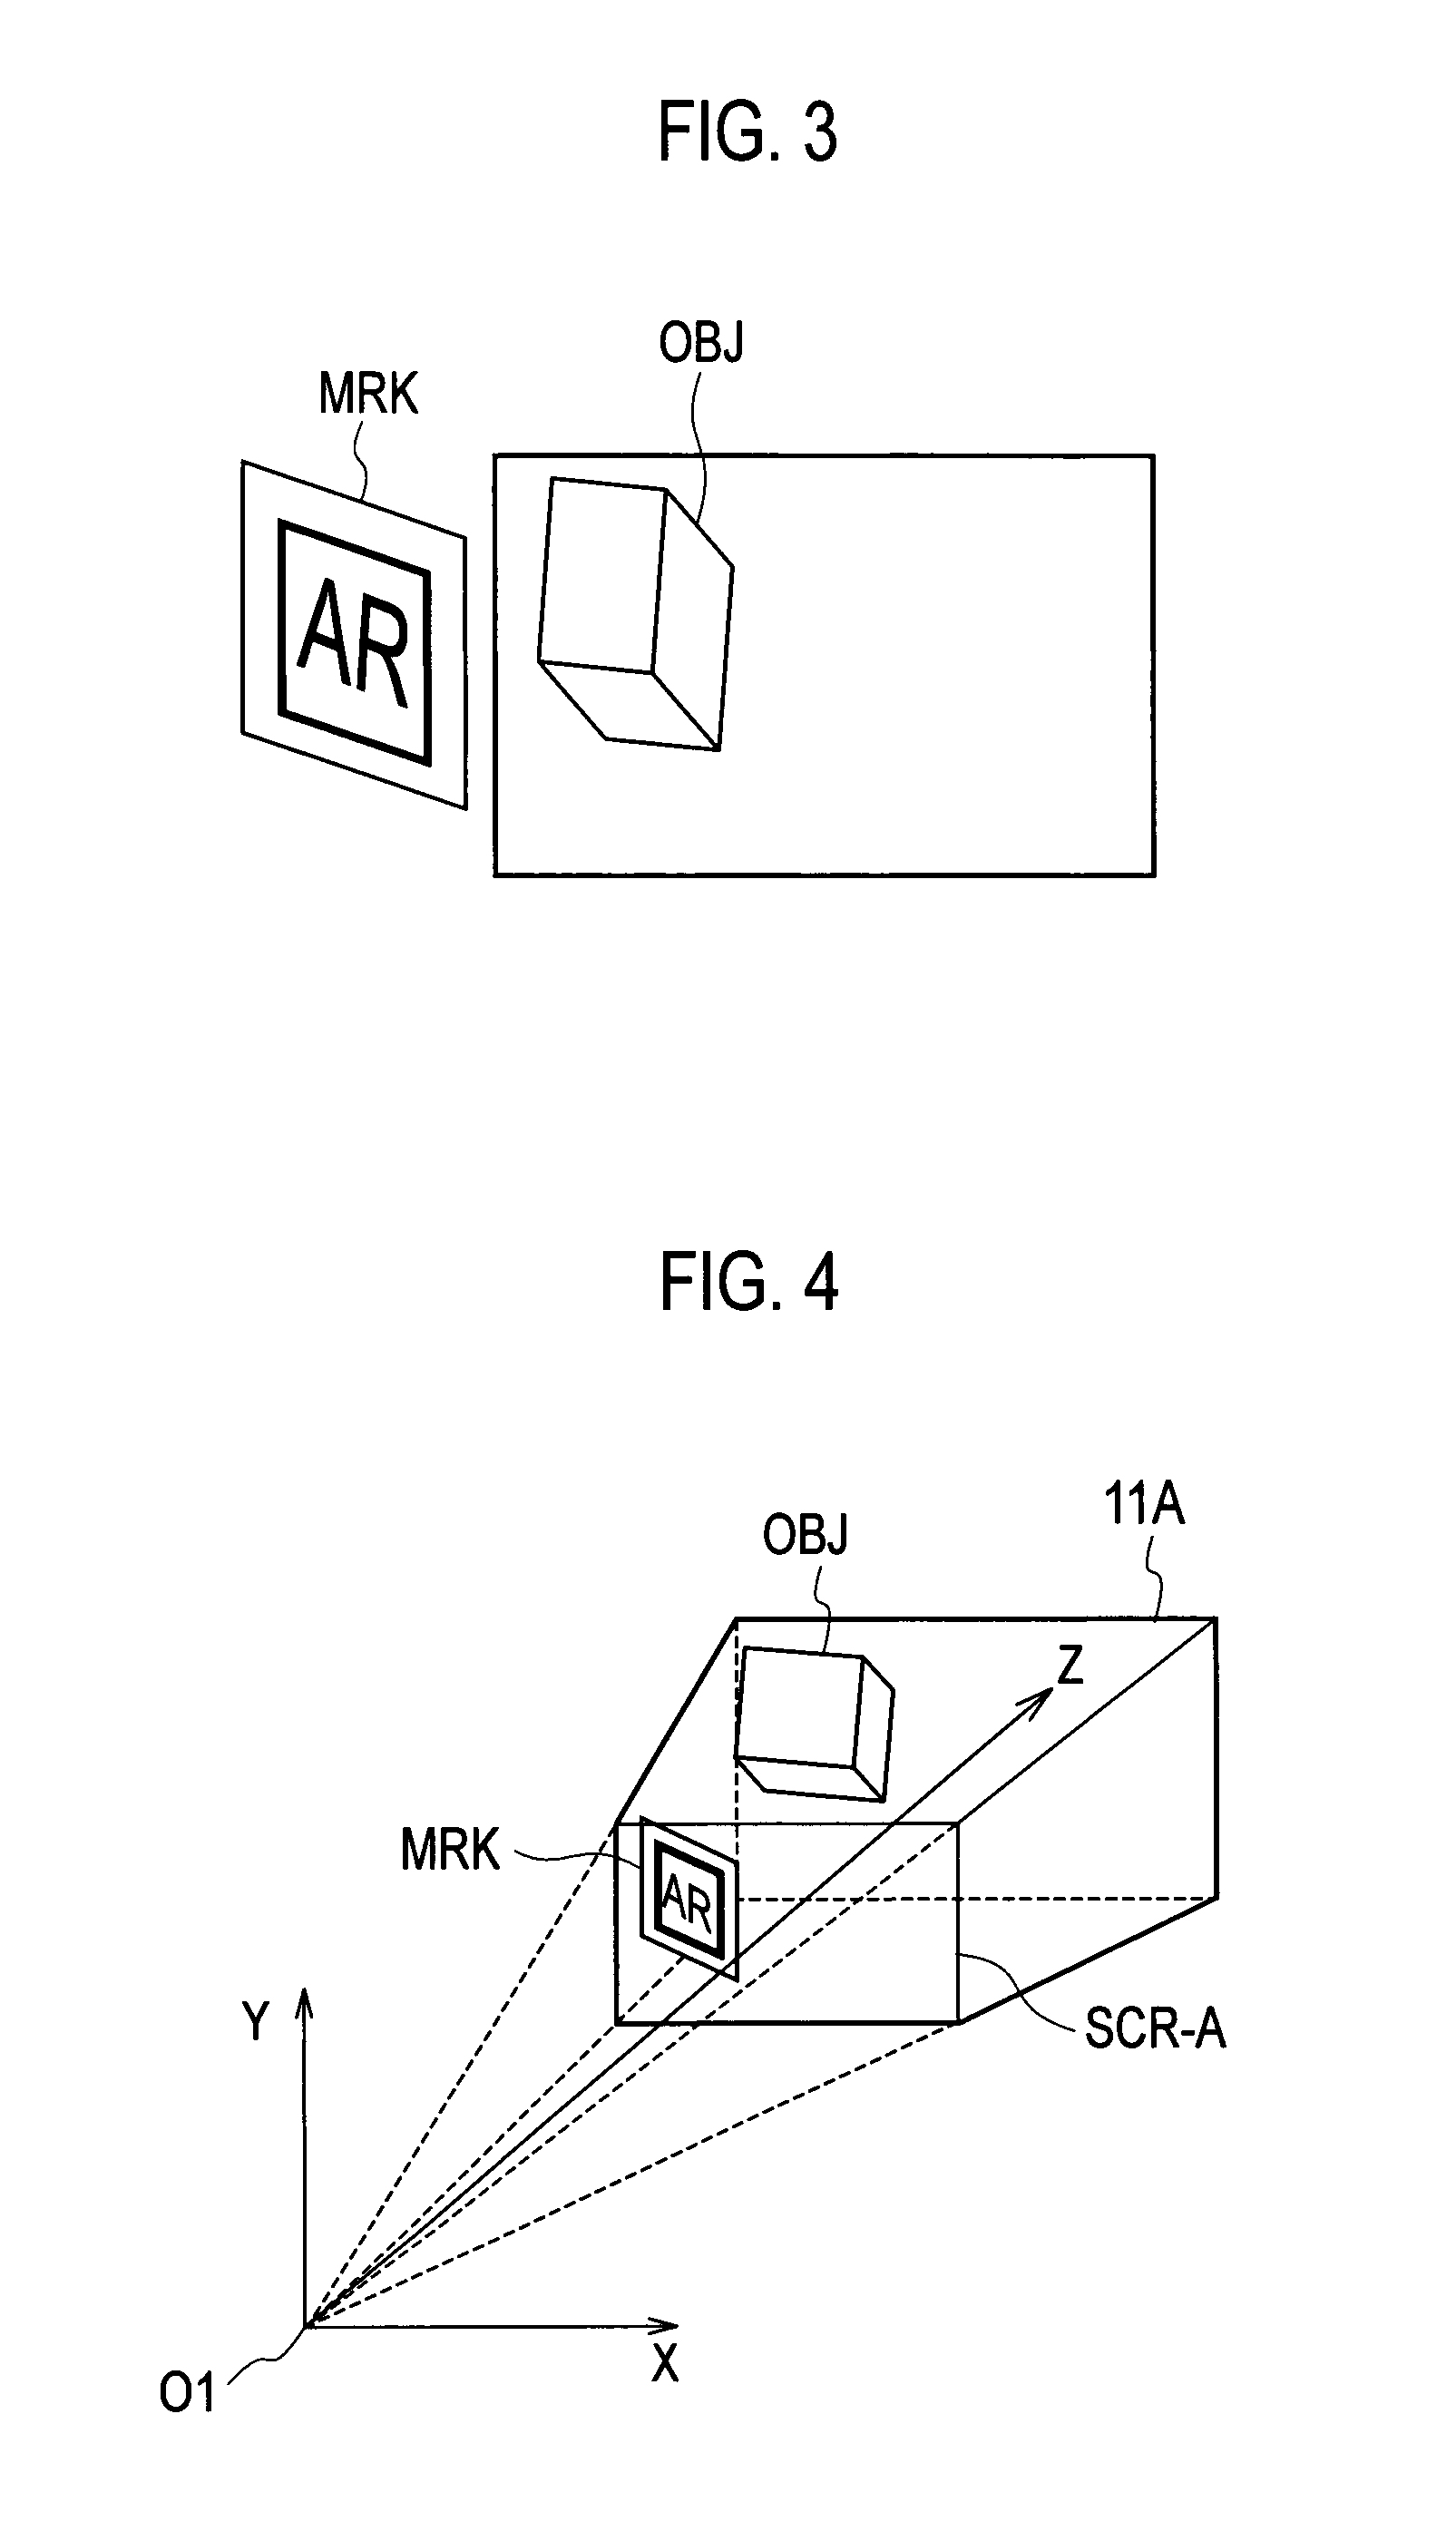 Ar image processing apparatus and method technical field